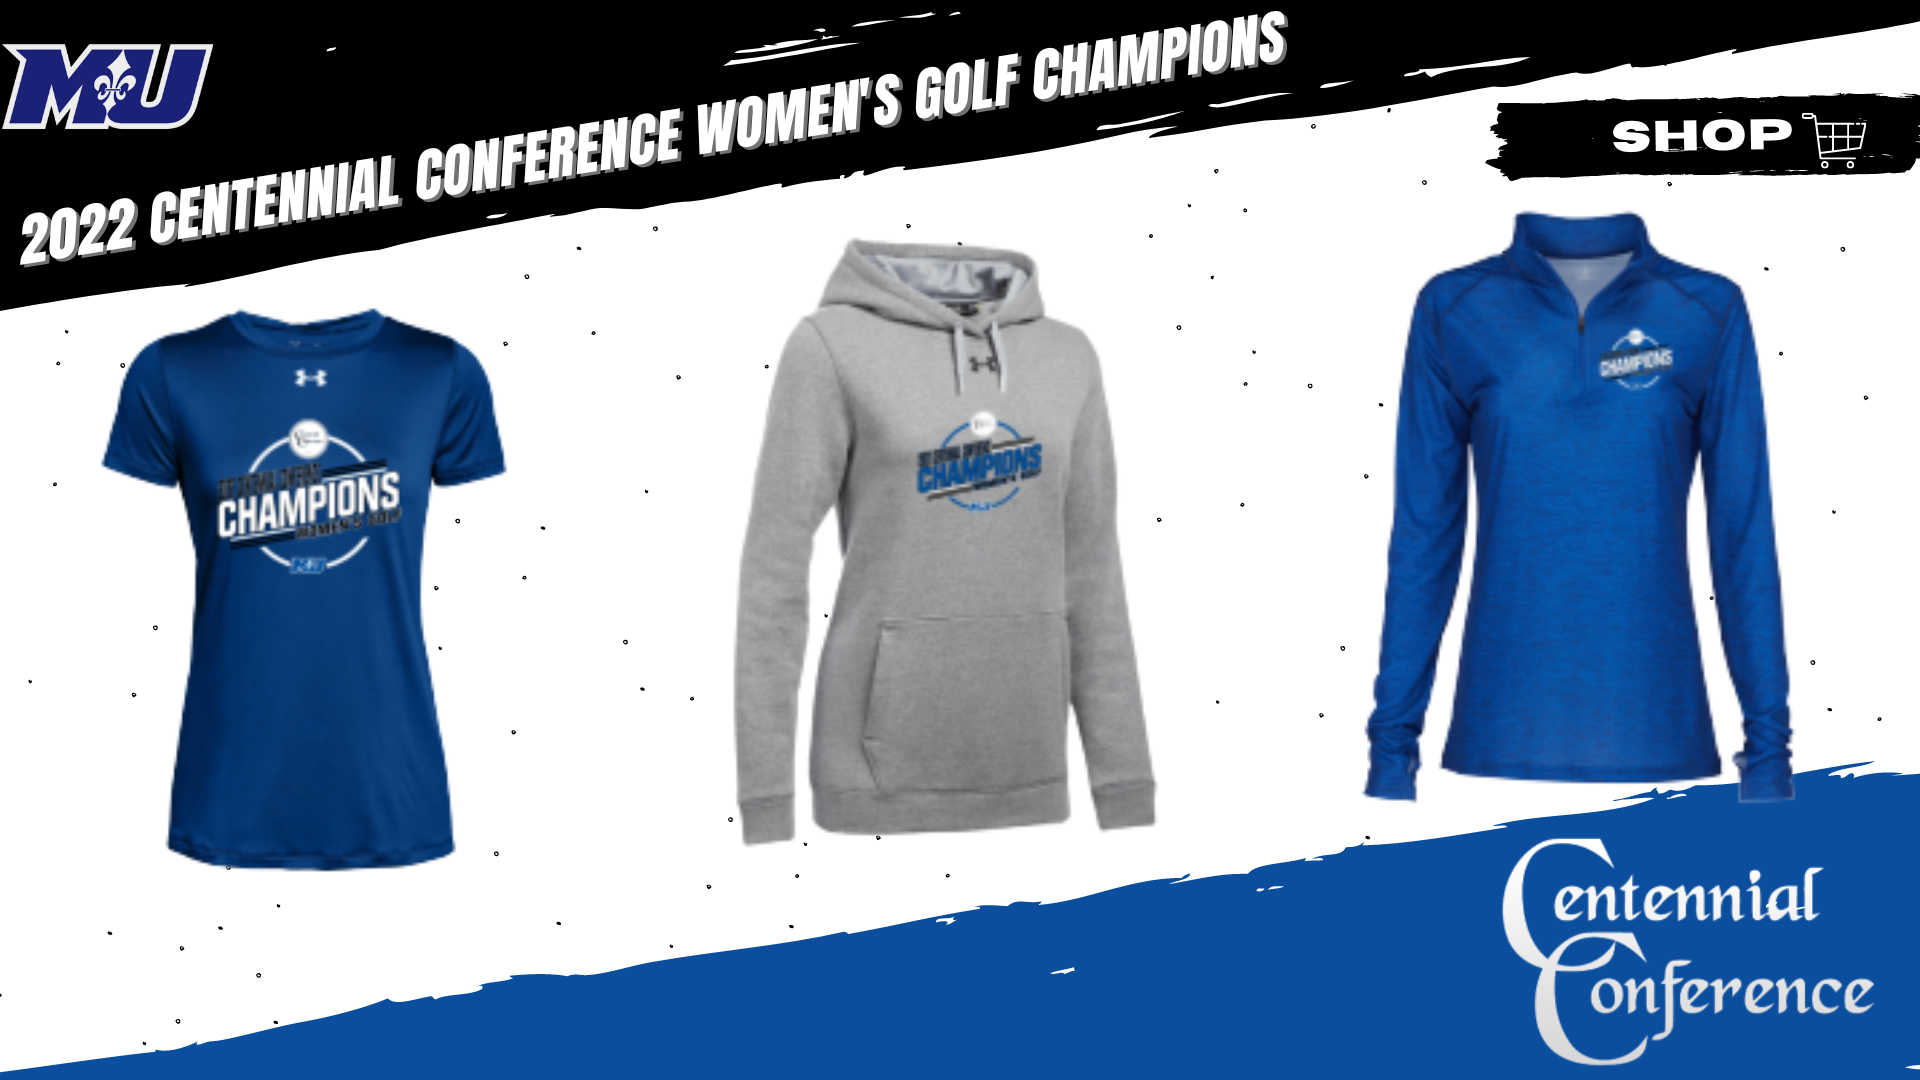 2022 Women’s Golf Championship Apparel Now Available